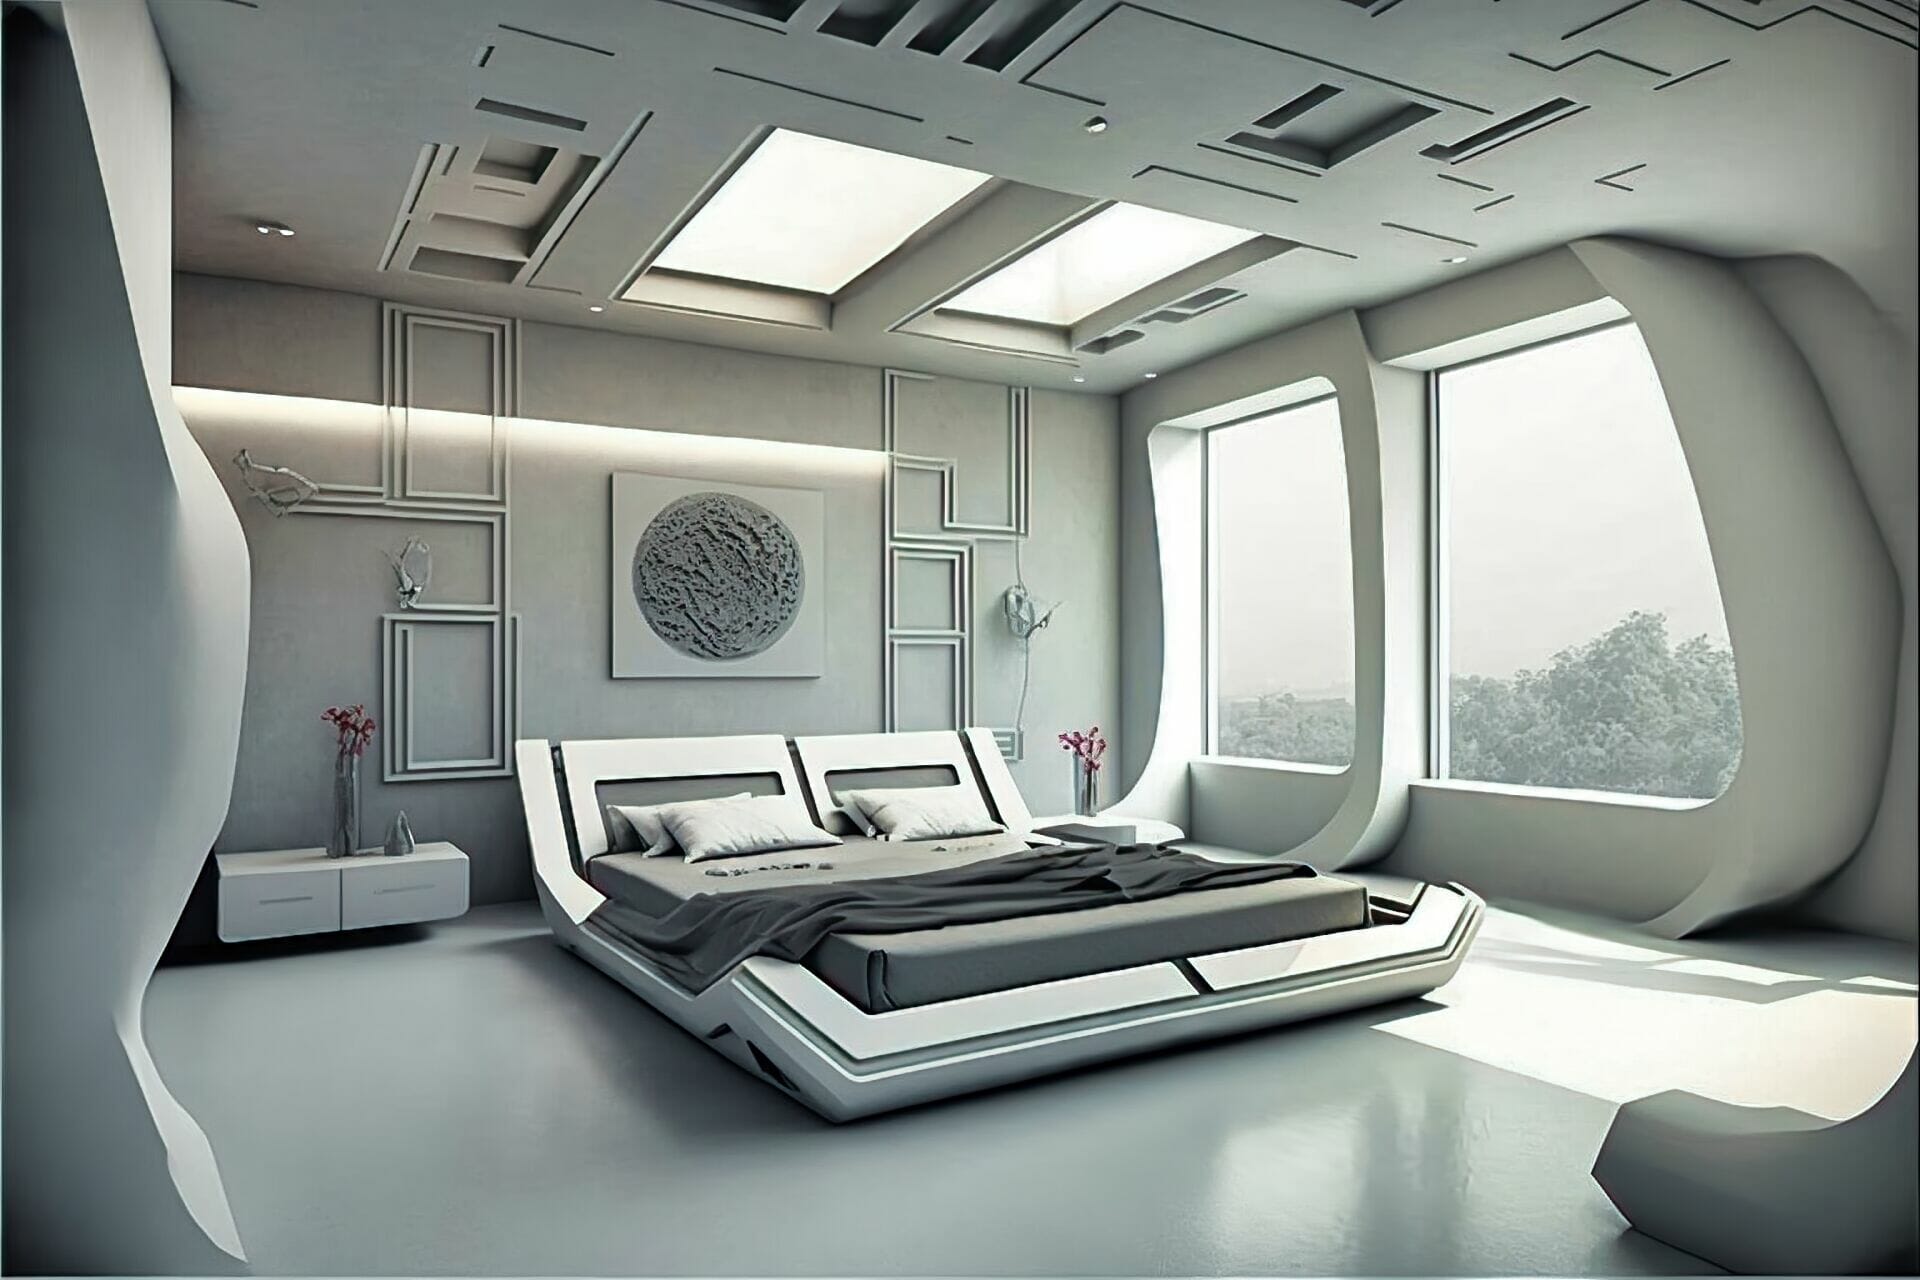 Futuristic Style Bedroom With A Modern Touch: This Bedroom Is Sleek And Modern, With A Large Bed And A Variety Of Modern Furniture Pieces. The Walls And Ceiling Are Painted A Bright White, And The Floor Is Made Up Of Sleek Grey Tiles.